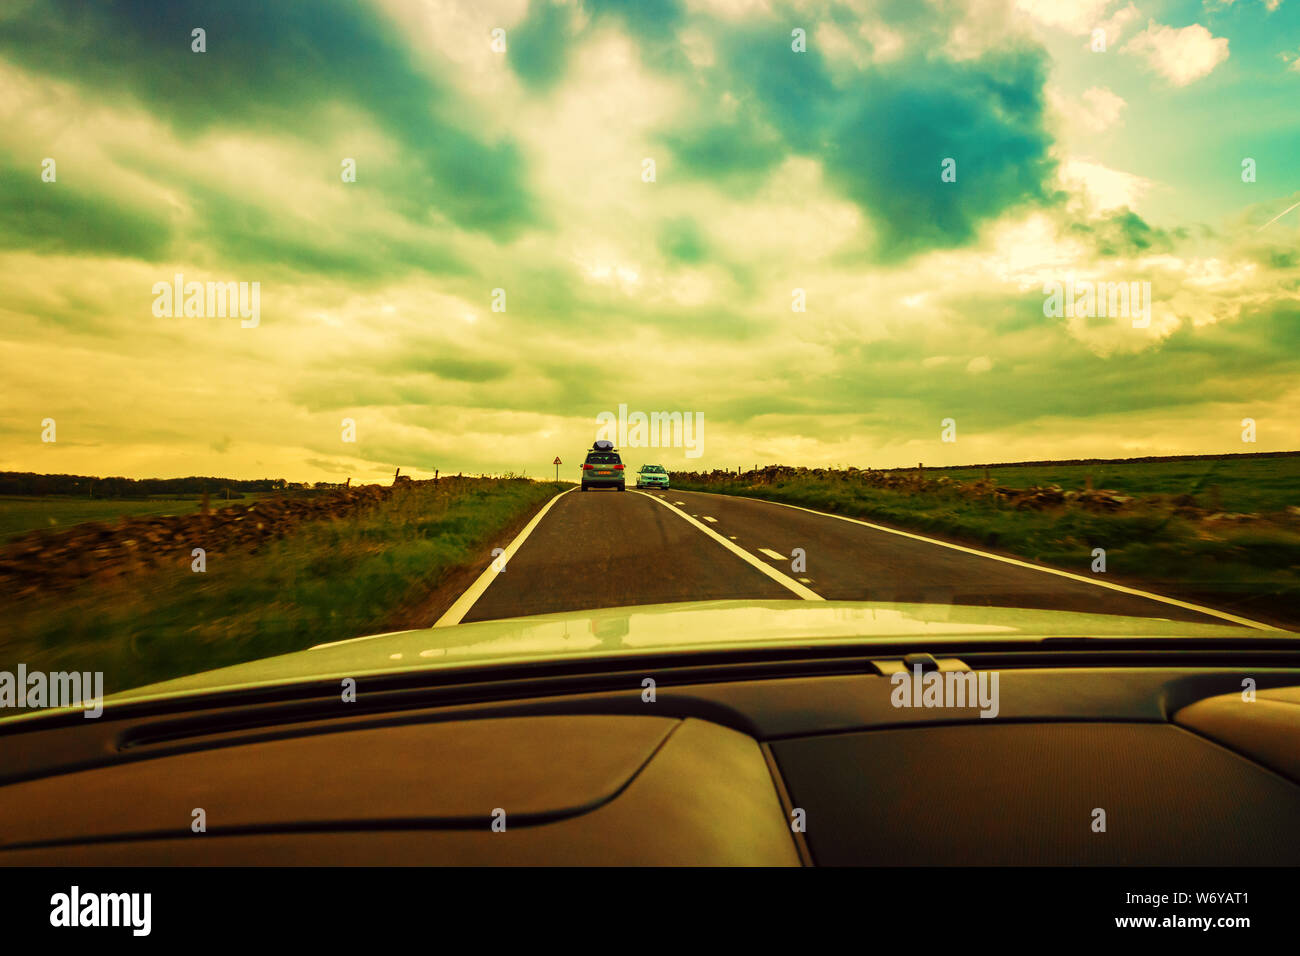 Drivers view through the windscreen of a Bentley Continental GTC Supersport car Stock Photo